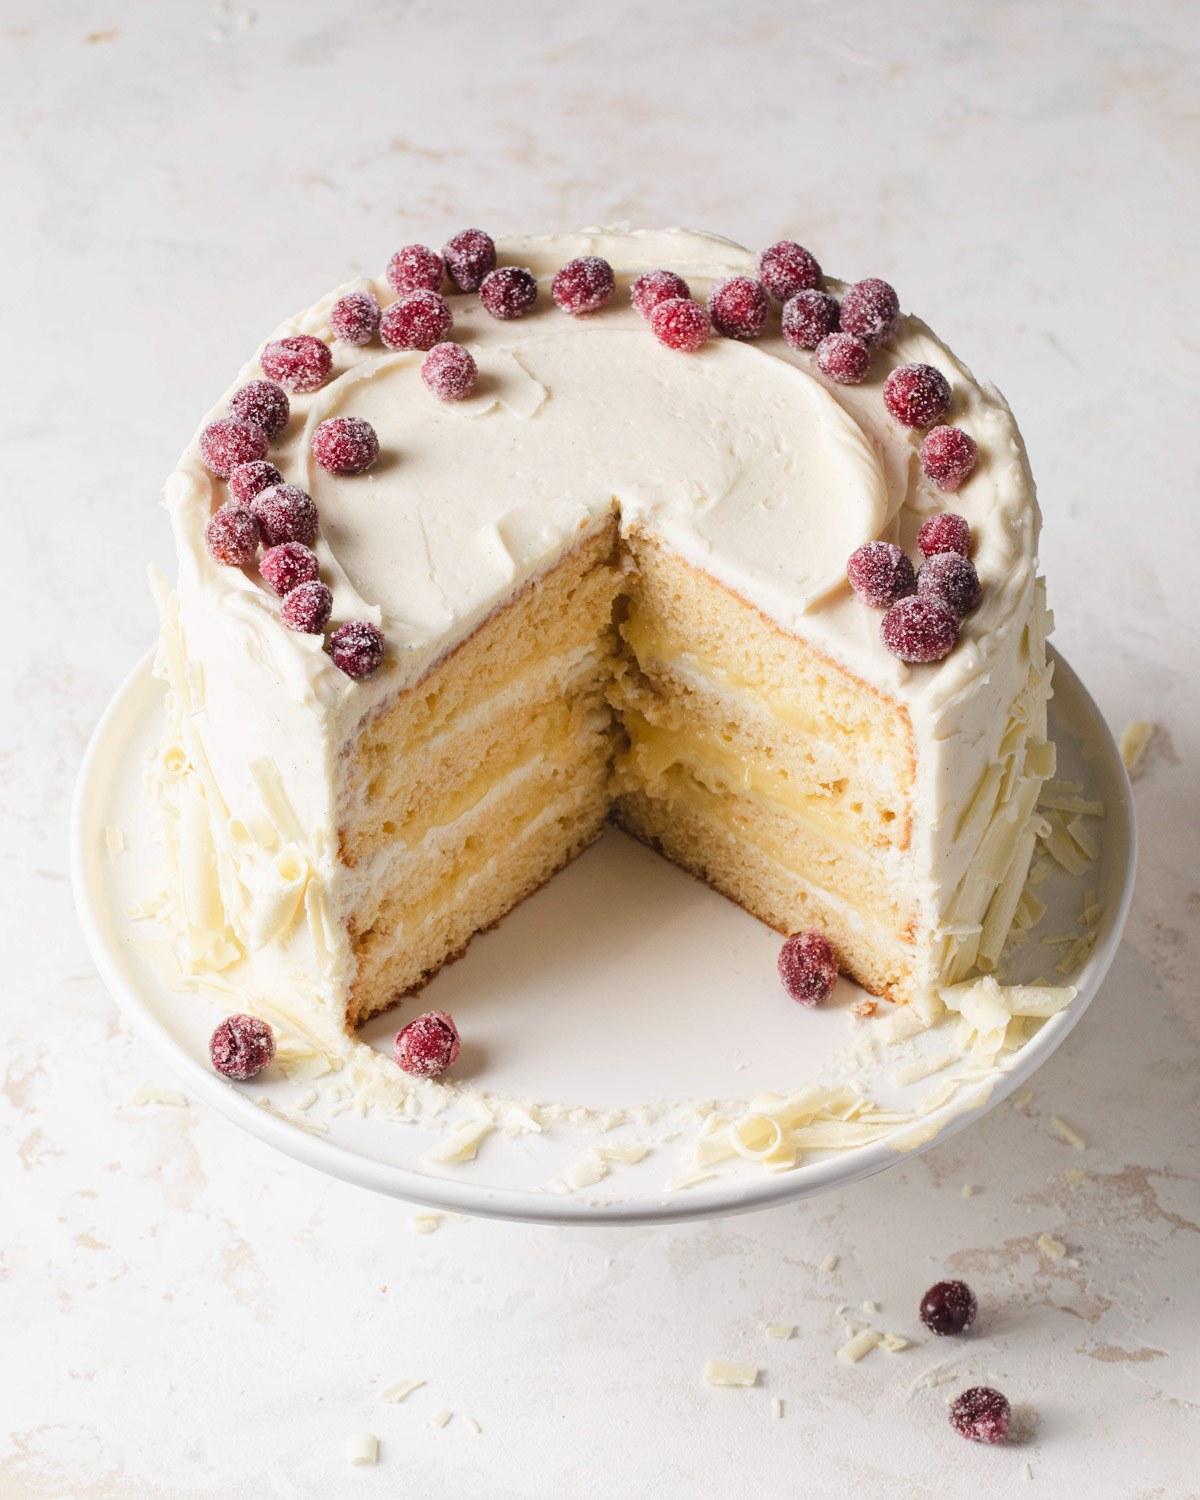 Lemon layer cake with lemon curd and white chocolate cream cheese frosting and sugar cranberries on top